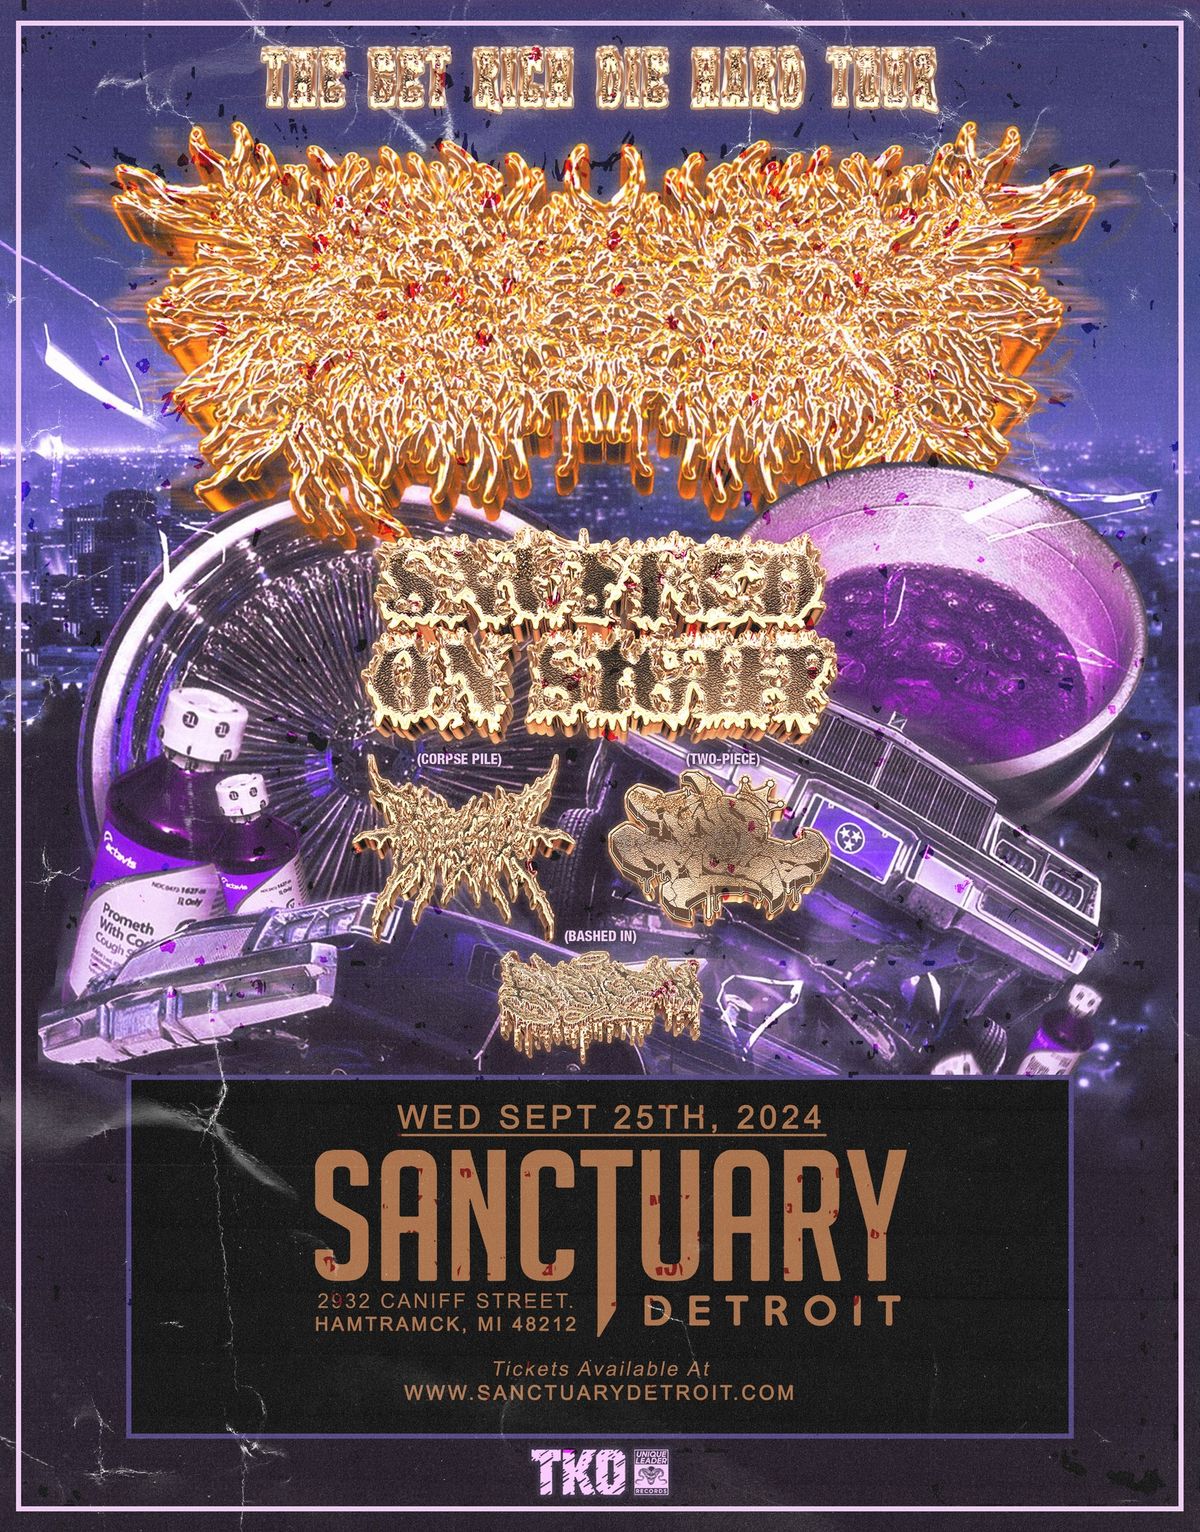 PeelingFlesh, Snuffed On Sight, Corpse Pile, Two Piece, Bashed In at The Sanctuary 9\/25